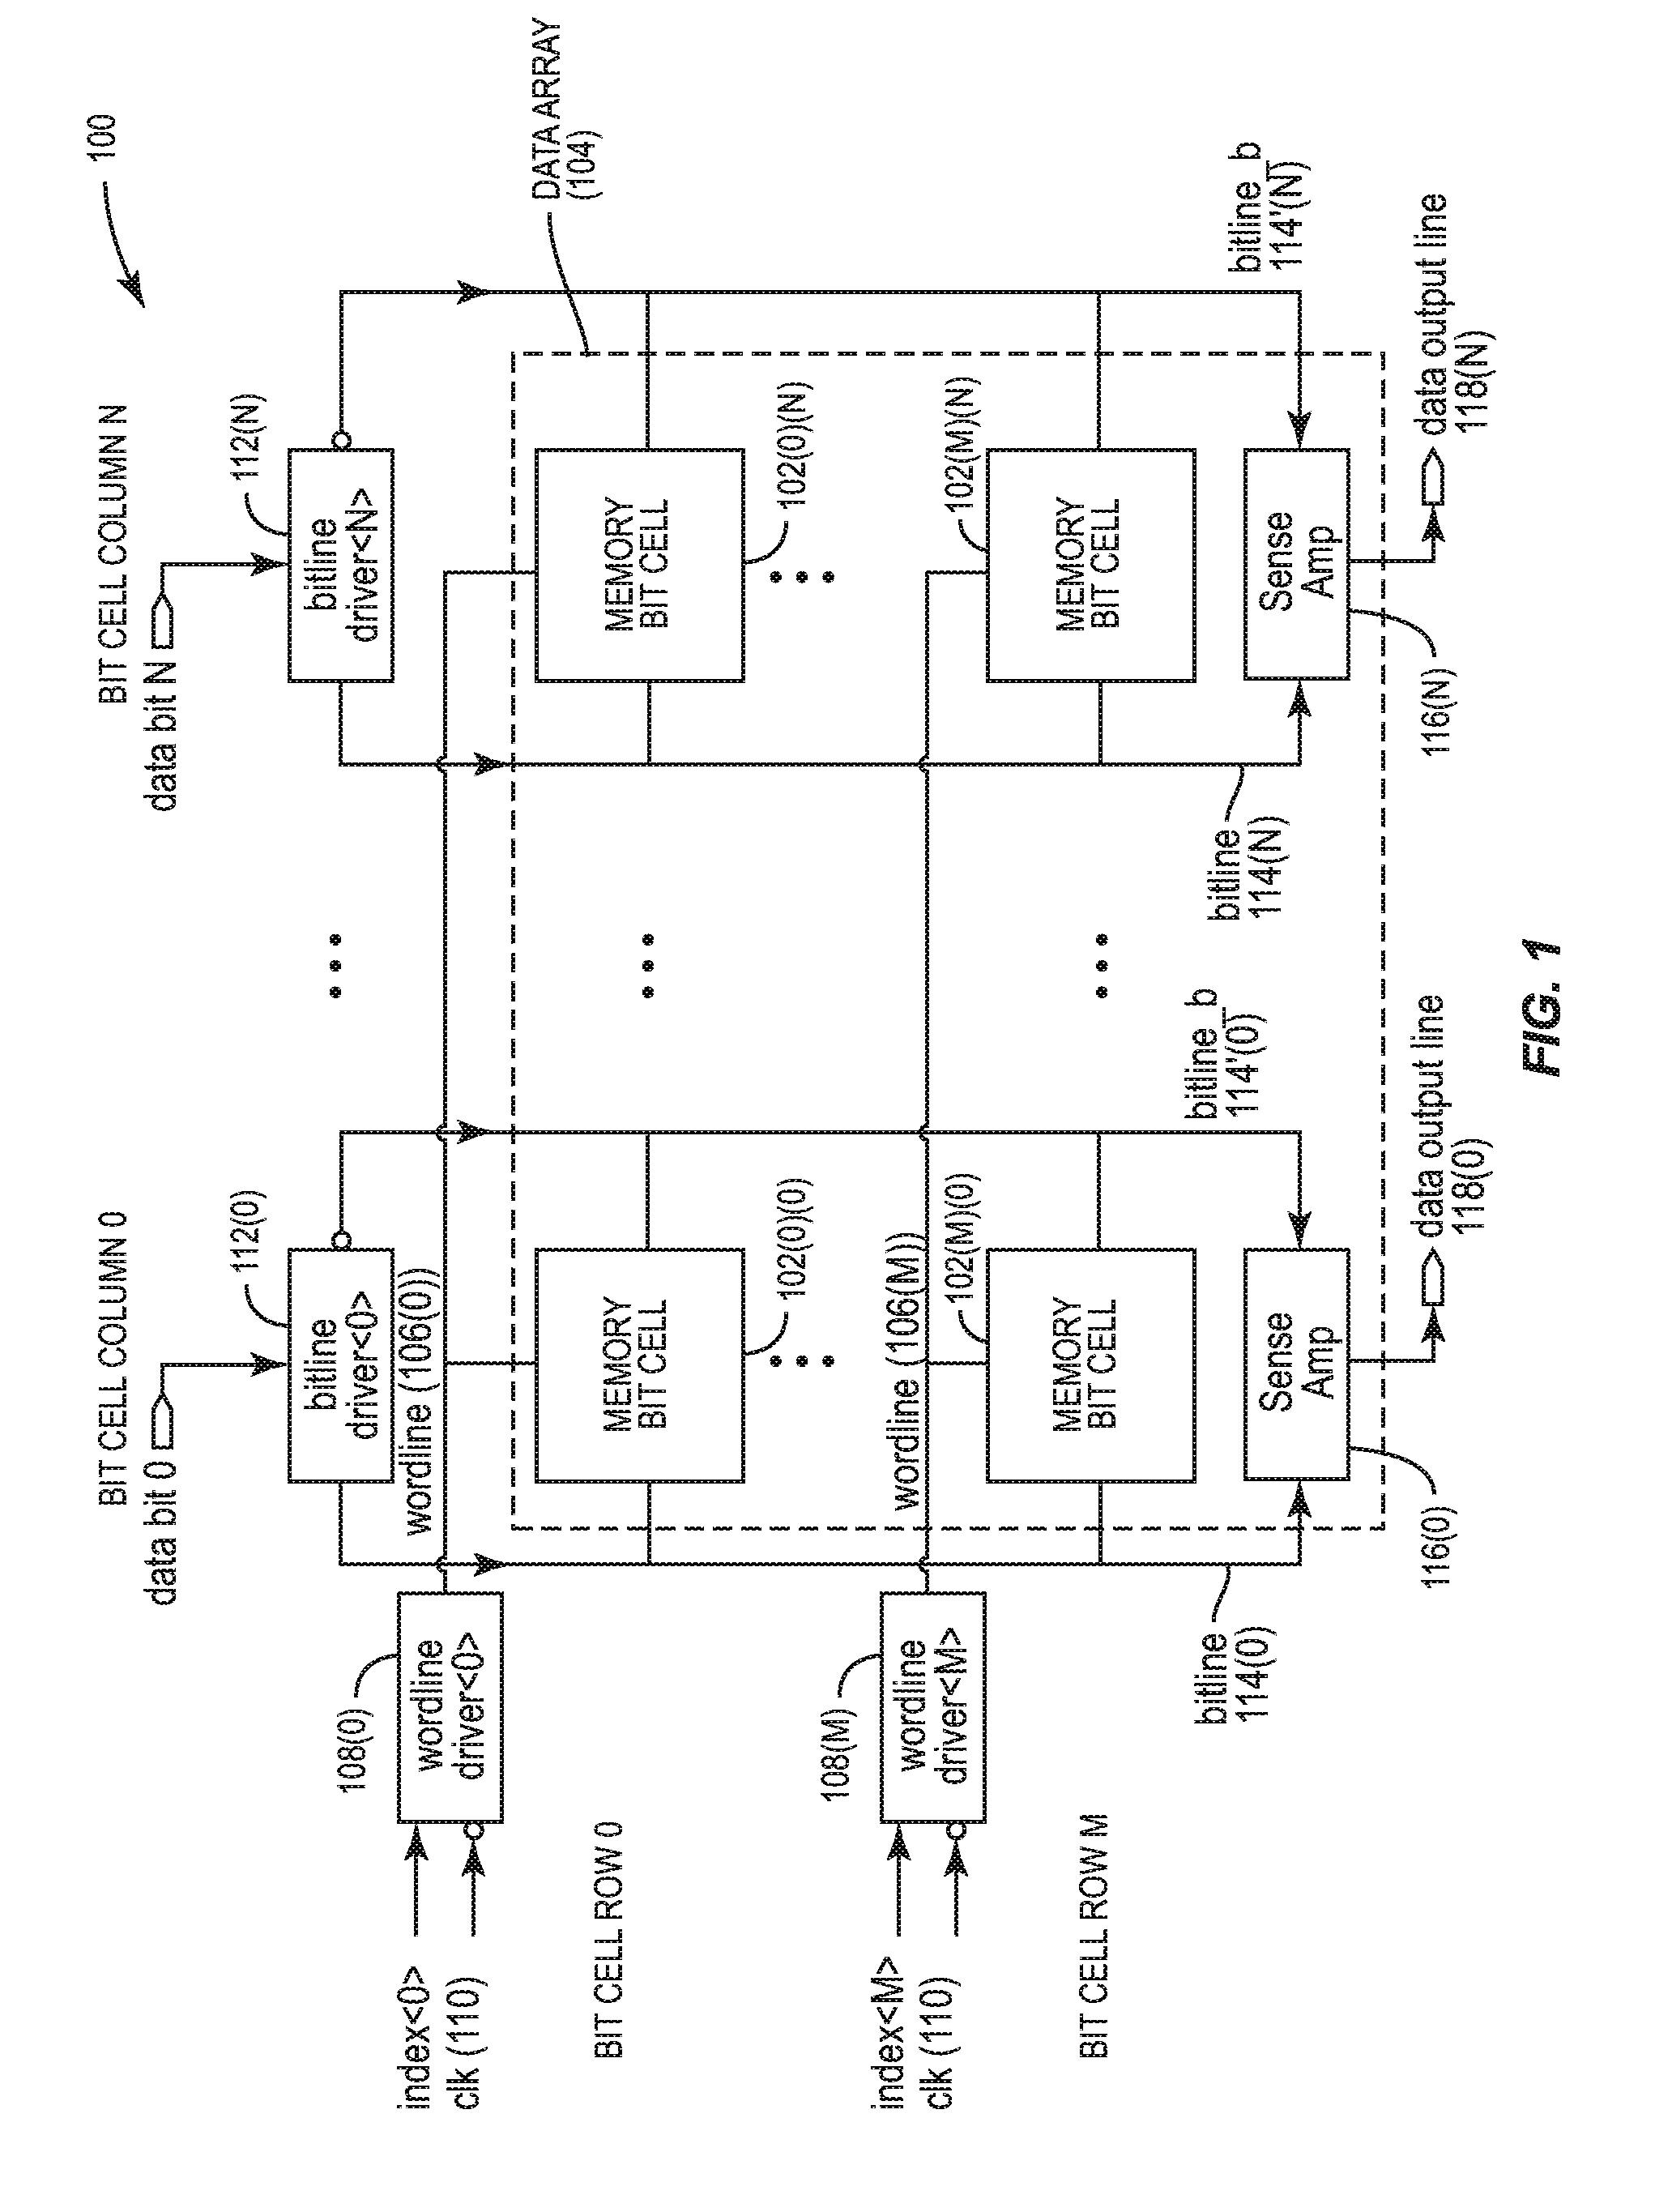 Wordline negative boost write-assist circuits for memory bit cells employing a p-type field-effect transistor (PFET) write port(s), and related systems and methods